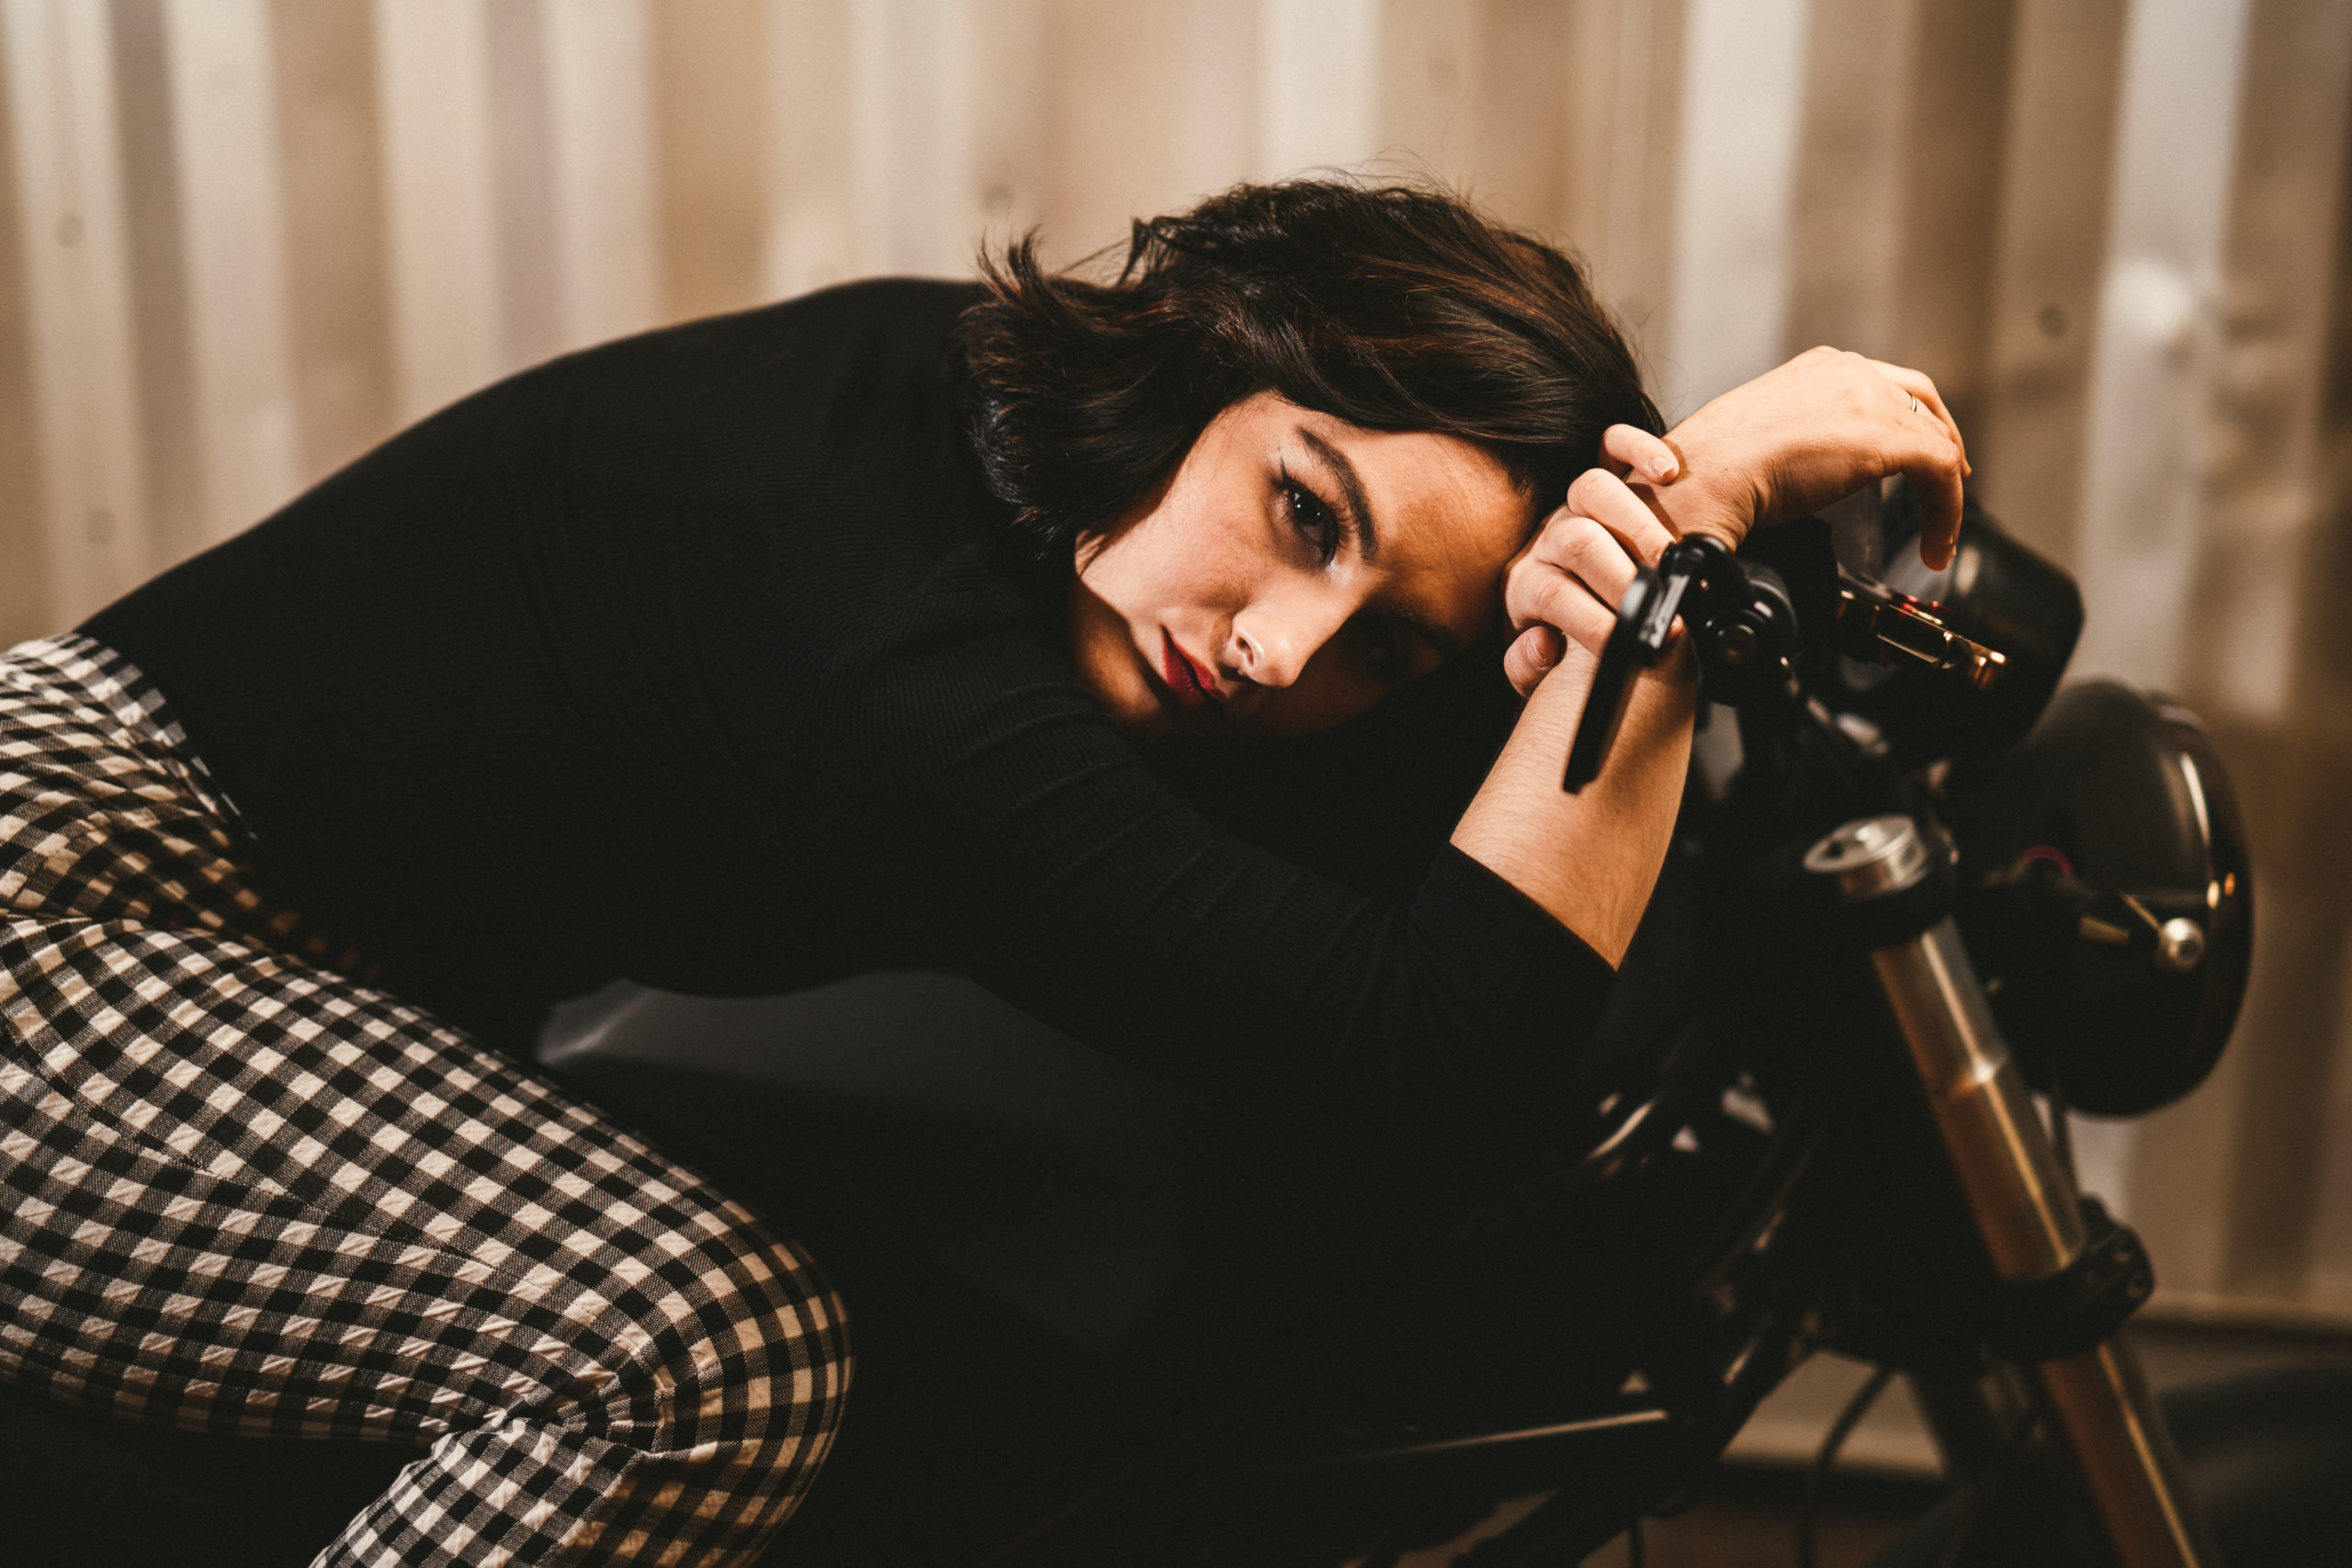 Closeup of woman with short brown hair wearing black top and black and white checkered pants posing for the camera crouching down on a motorcycle